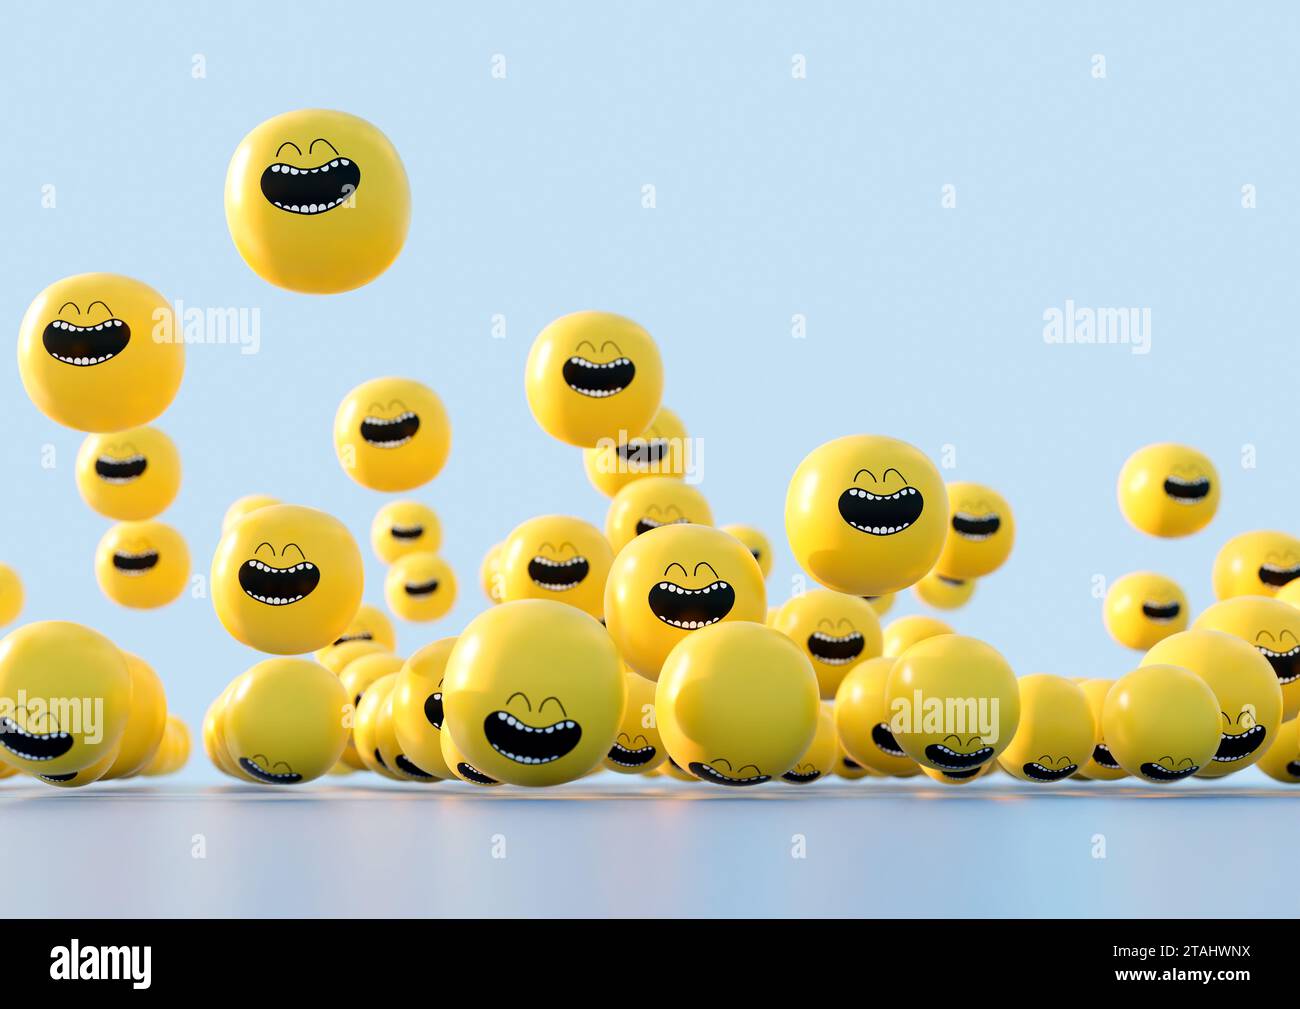 A concept showing a mass of round yellow heads with big smiley faces bouncing in the air on a light background - 3D render Stock Photo